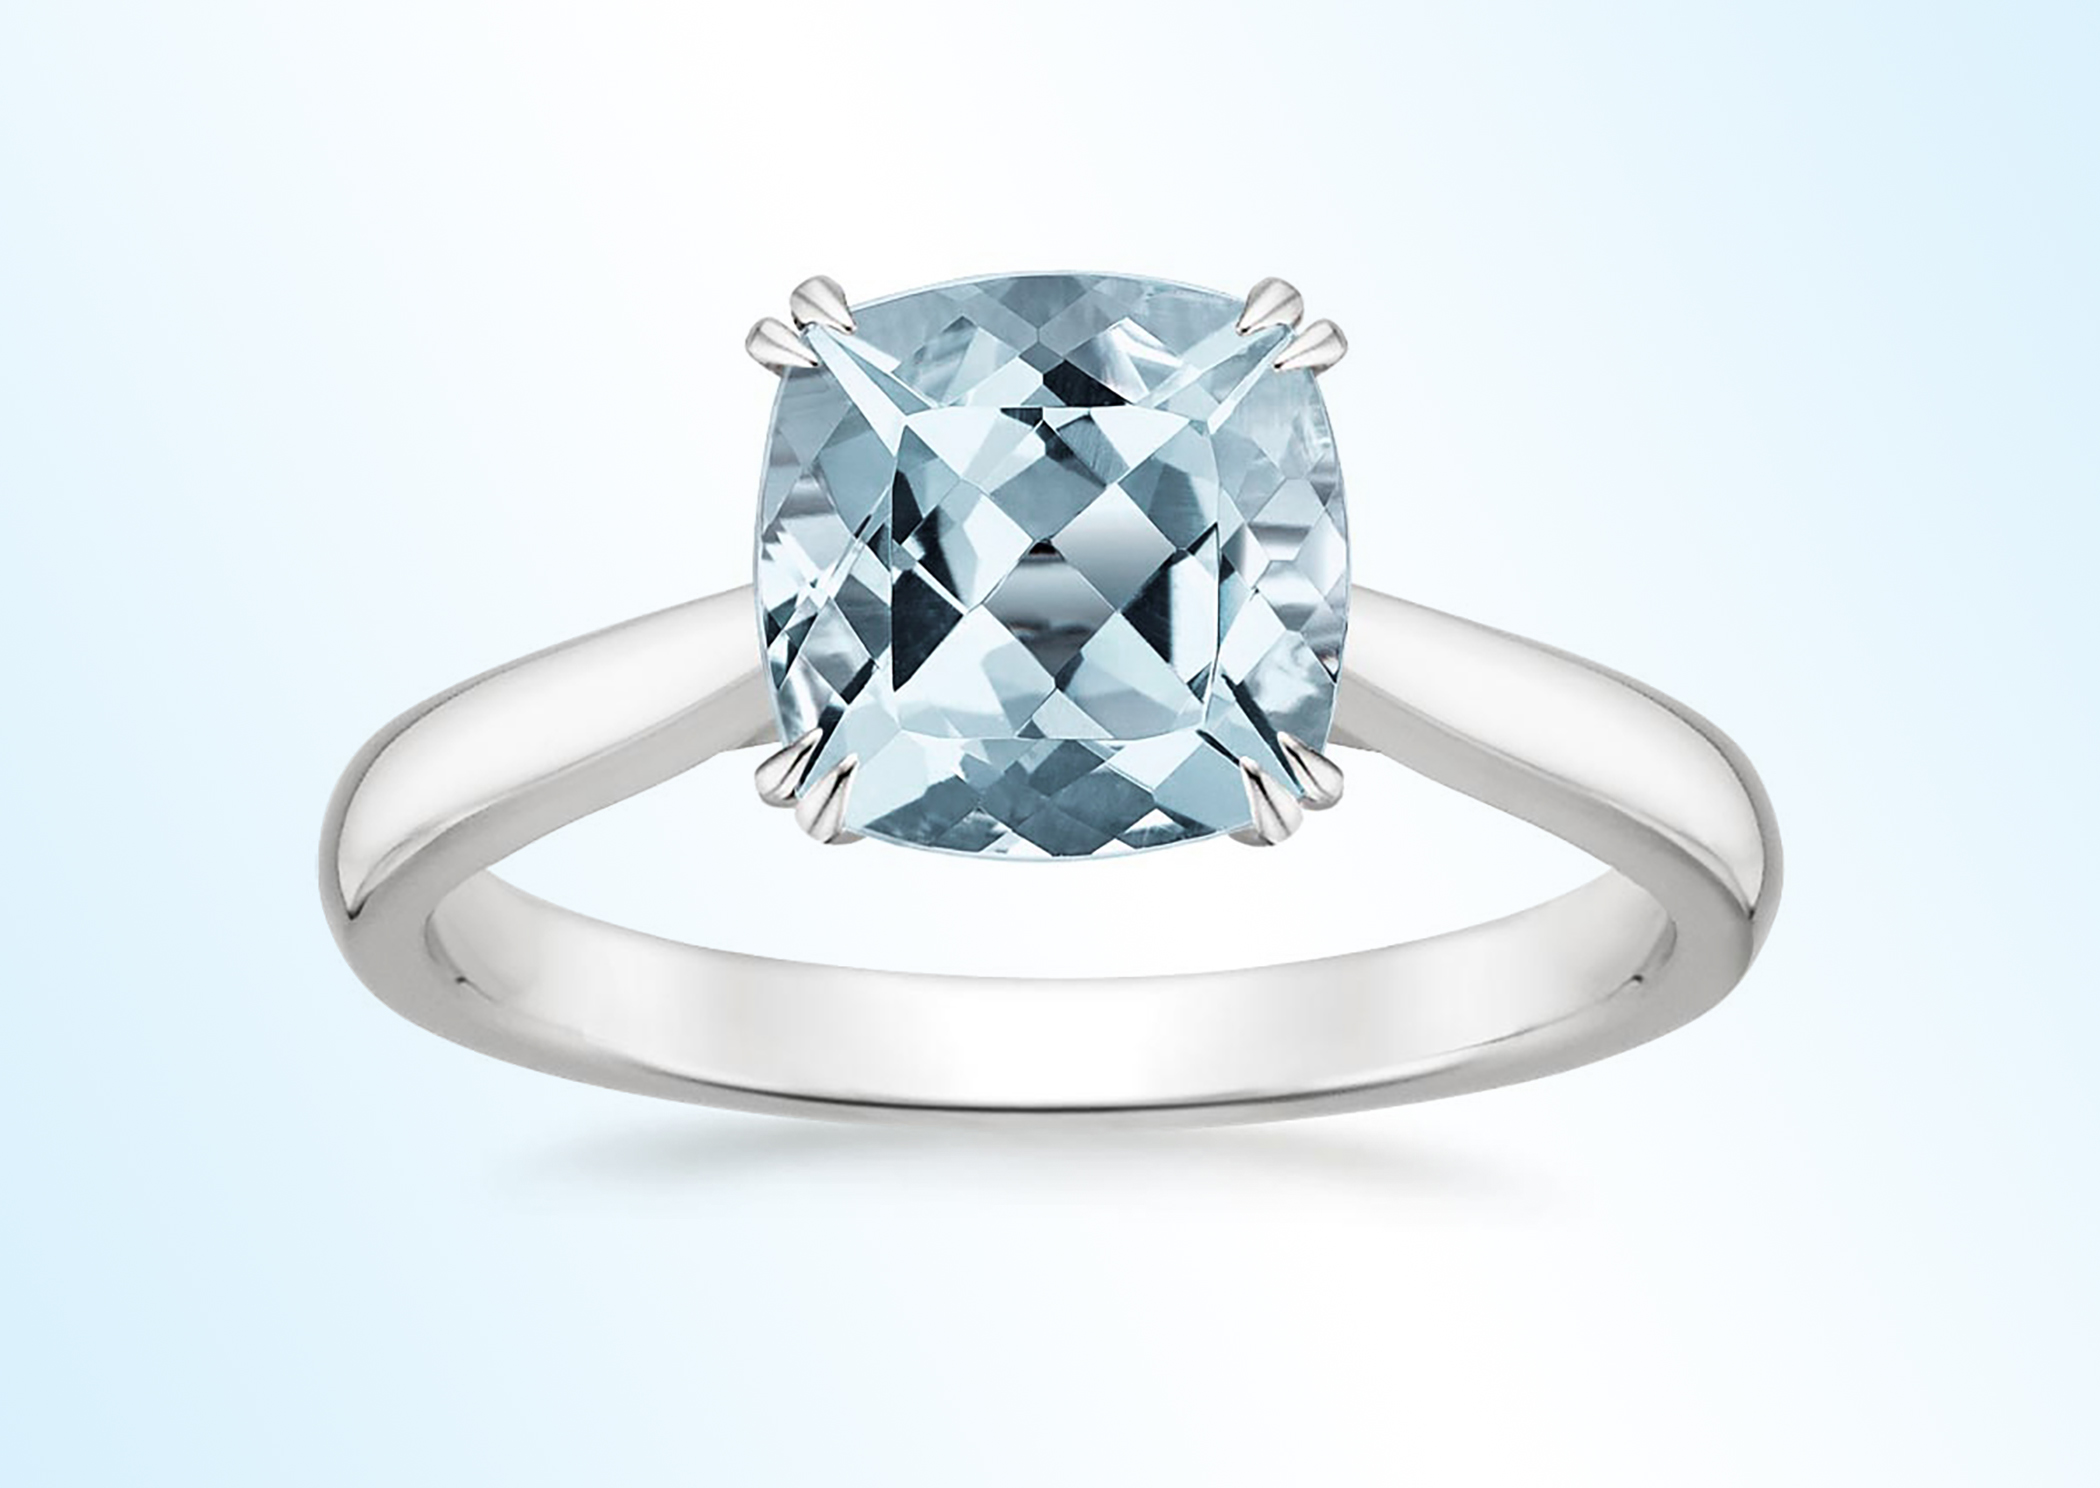 7 Classy Alternatives to Expensive Diamond Engagement Rings